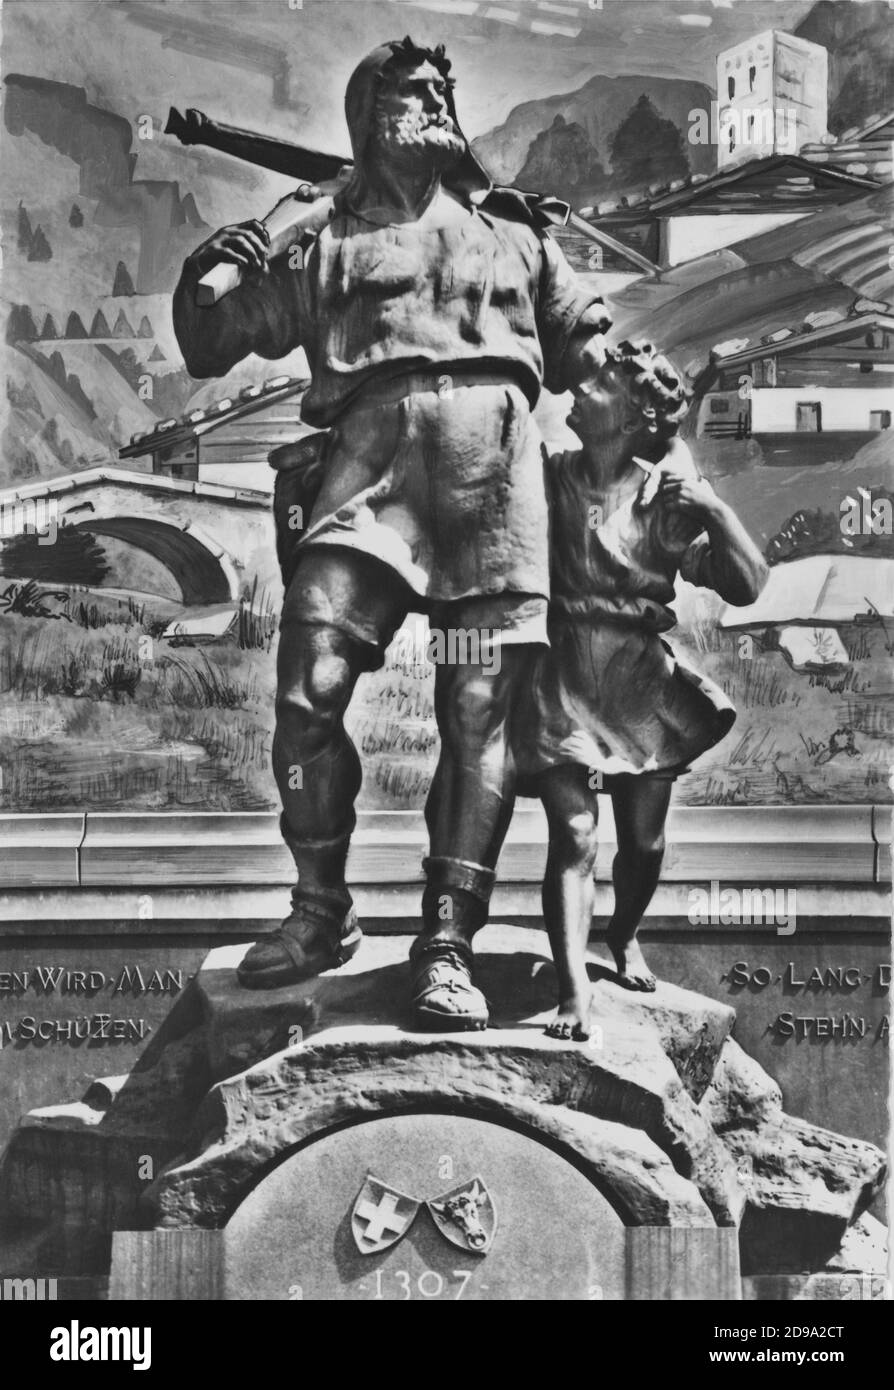 The WILHELM TELL saga , monument in  Kapuzinerkloster Allerheiligen in Altdorf . Statue by Swiss sculptor Richard Kissling ( 1848 - 1919 ) . William Tell (German: Wilhelm Tell; French: Guillaume Tell; Italian: Guglielmo Tell) is a legendary hero of disputed historical authenticity who is said to have lived in the alpine Canton of Uri in Switzerland in the early 14th century. Another documentation of Tell’s exploits is the Song of the Founding of the Confederation (German: Lied von der Entstehung der Eidgenossenschaft). This earliest surviving Tell song (German: Tellenlied) was composed around Stock Photo